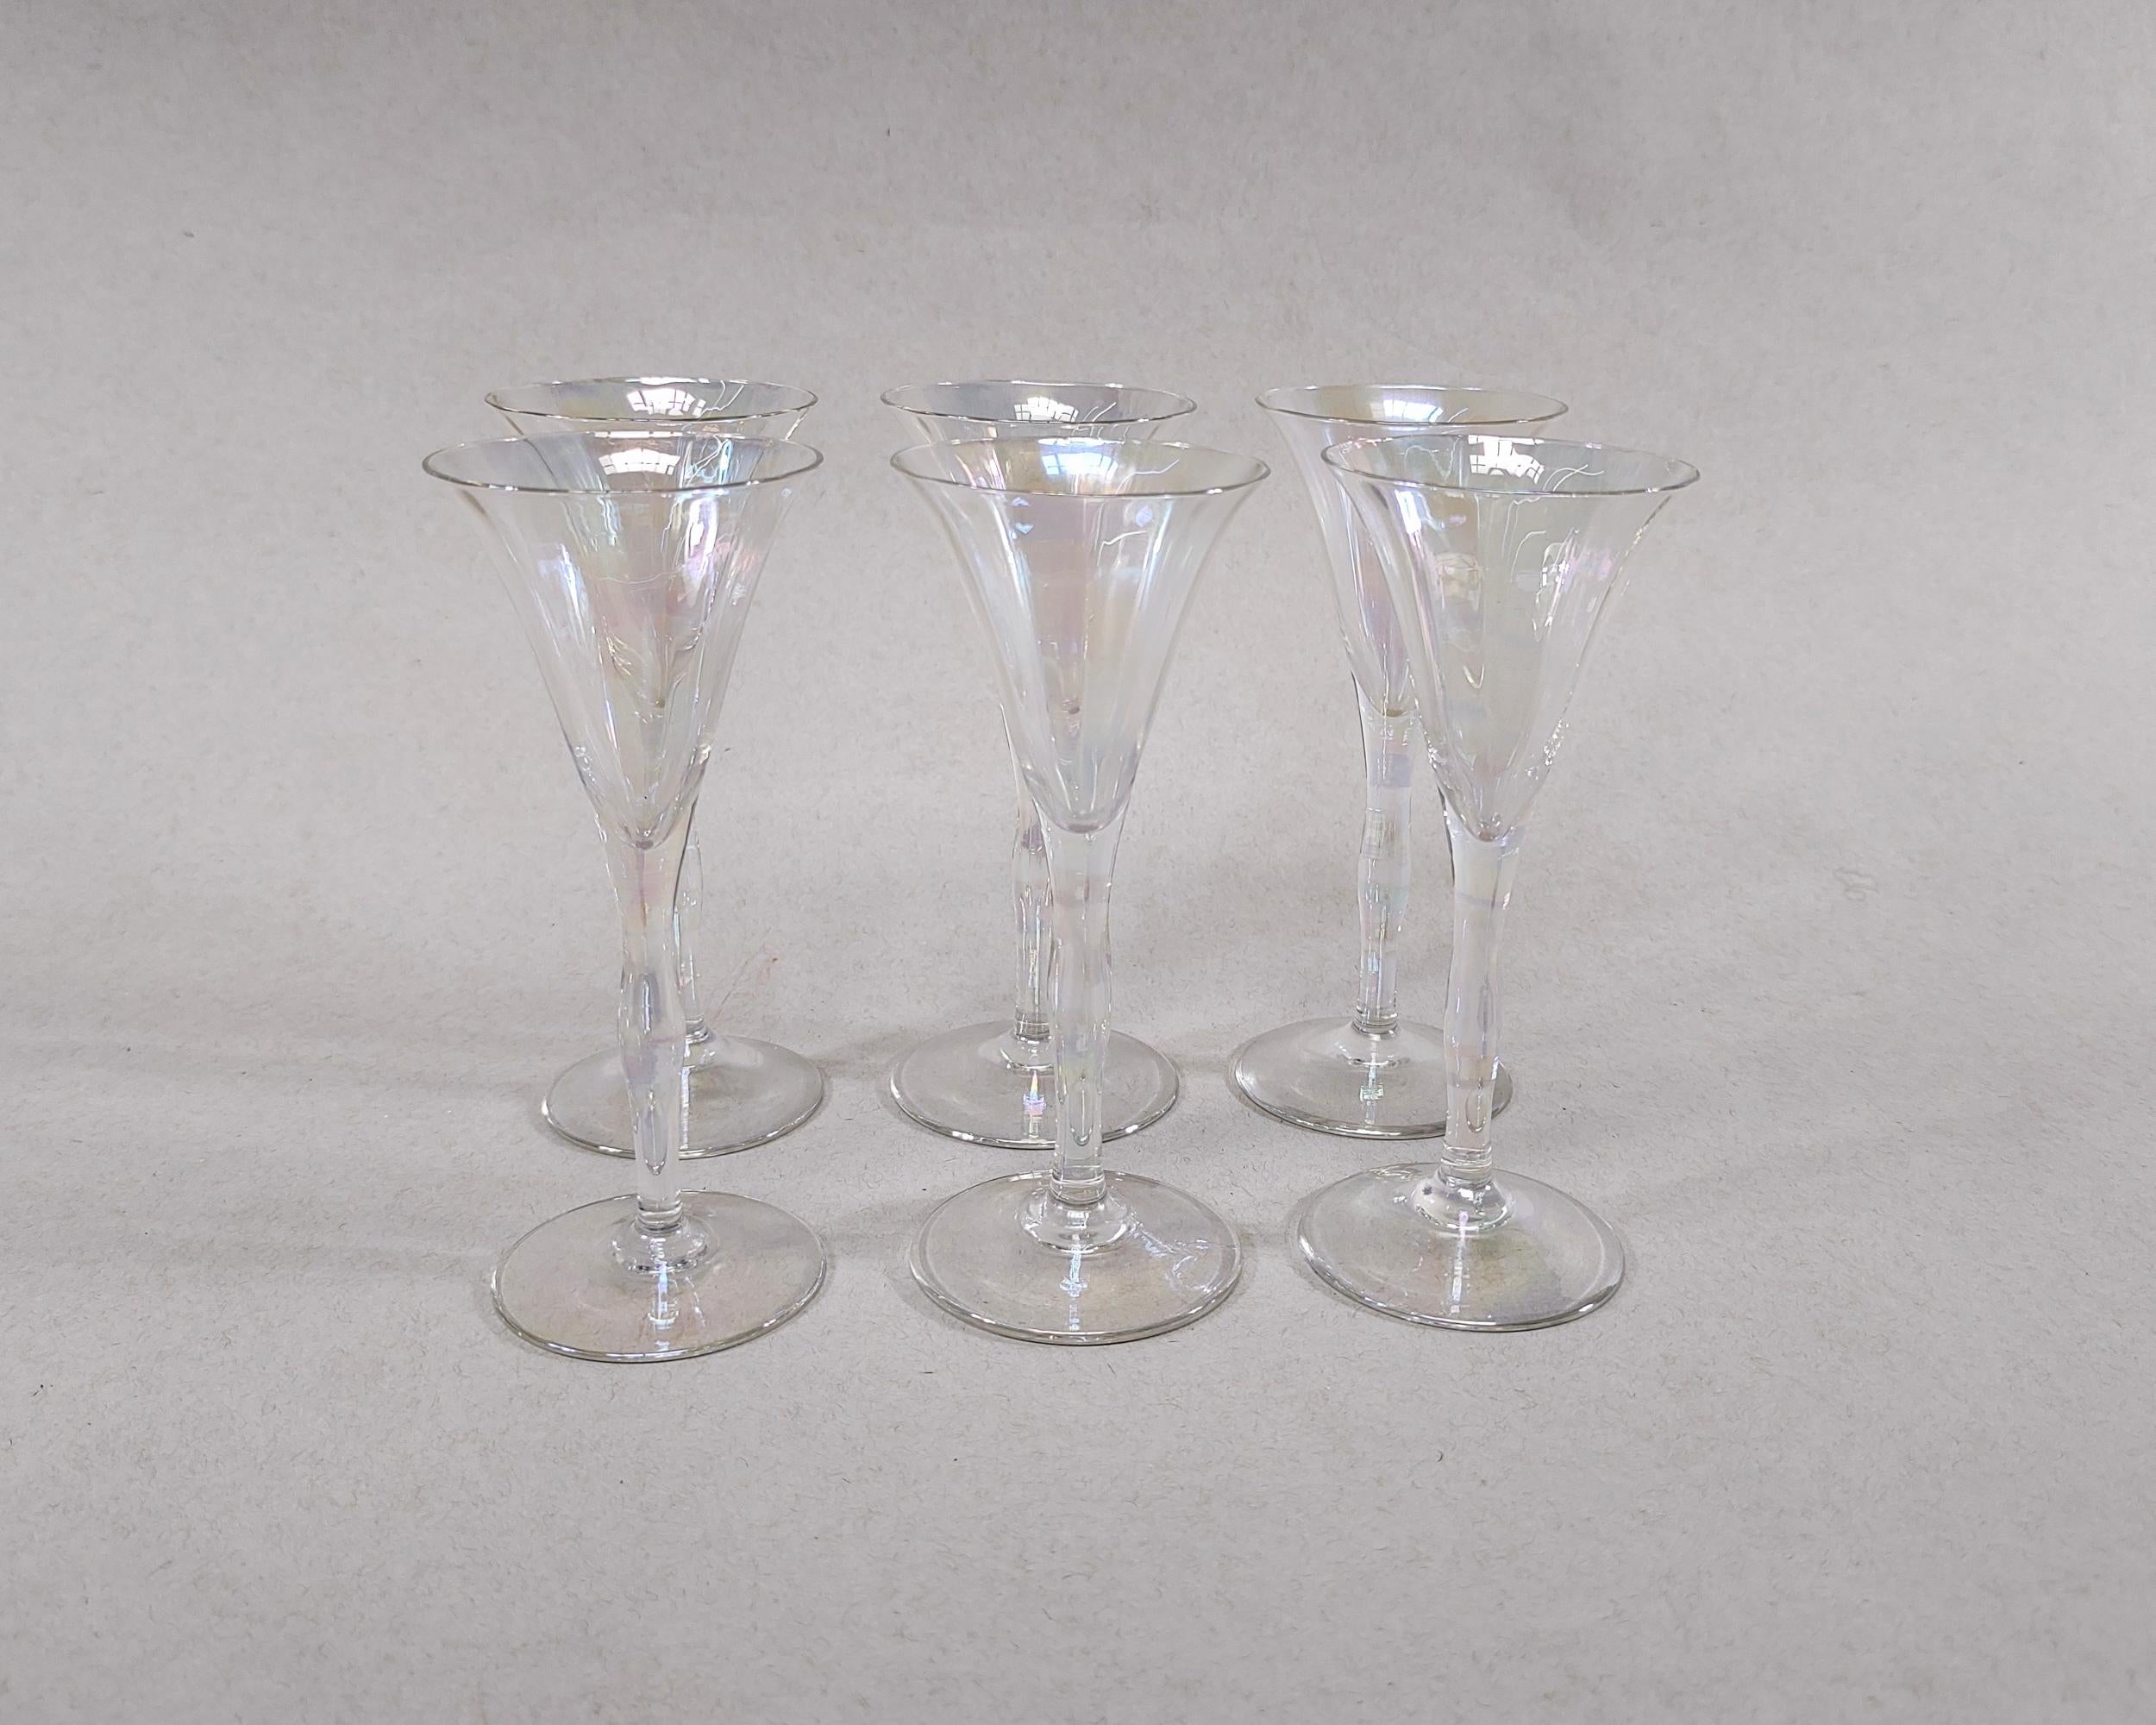 Set of six vintage 'Mother of Pearl' delicate iridescent flared horn-shaped aperitif cordial glasses by Fostoria circa 1930. Flared thin rims and hourglass shaped stems. Hand blown glass. Overall excellent condition, no chips or cracks.

5.5